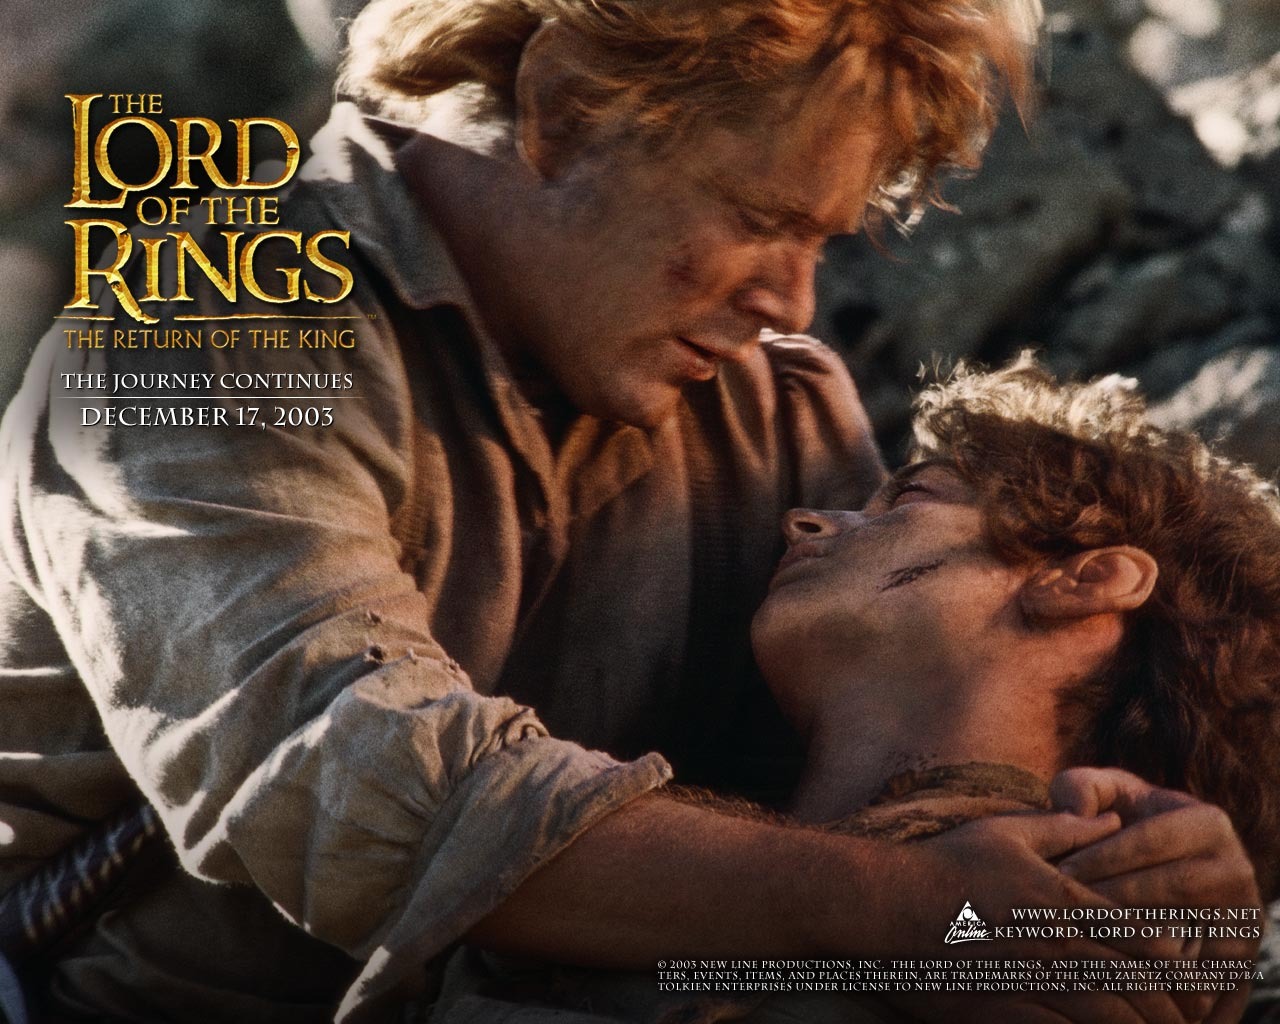 The Lord of the Rings 指环王19 - 1280x1024